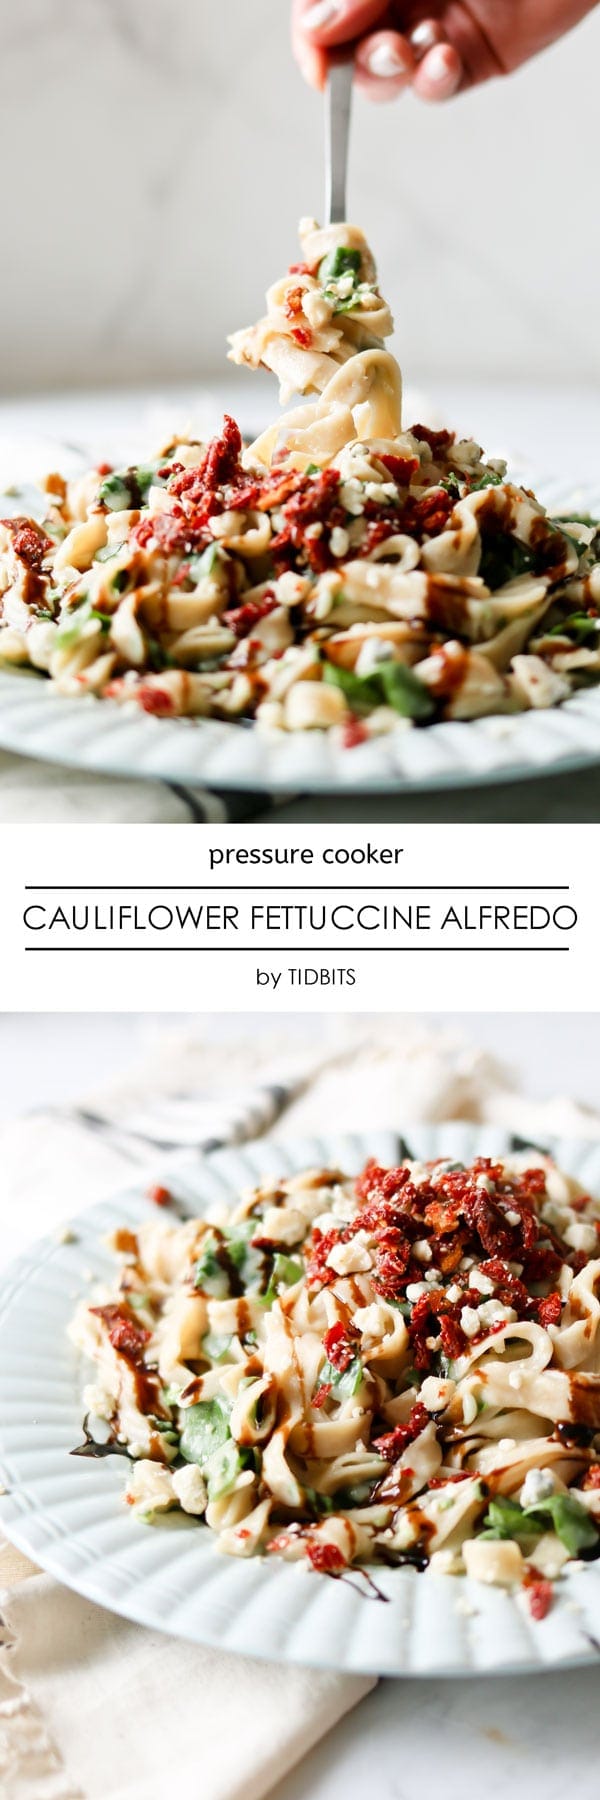 Pressure Cooker Cauliflower Fettuccine Alfredo. Healthy, delicious, and packed full of veggies!